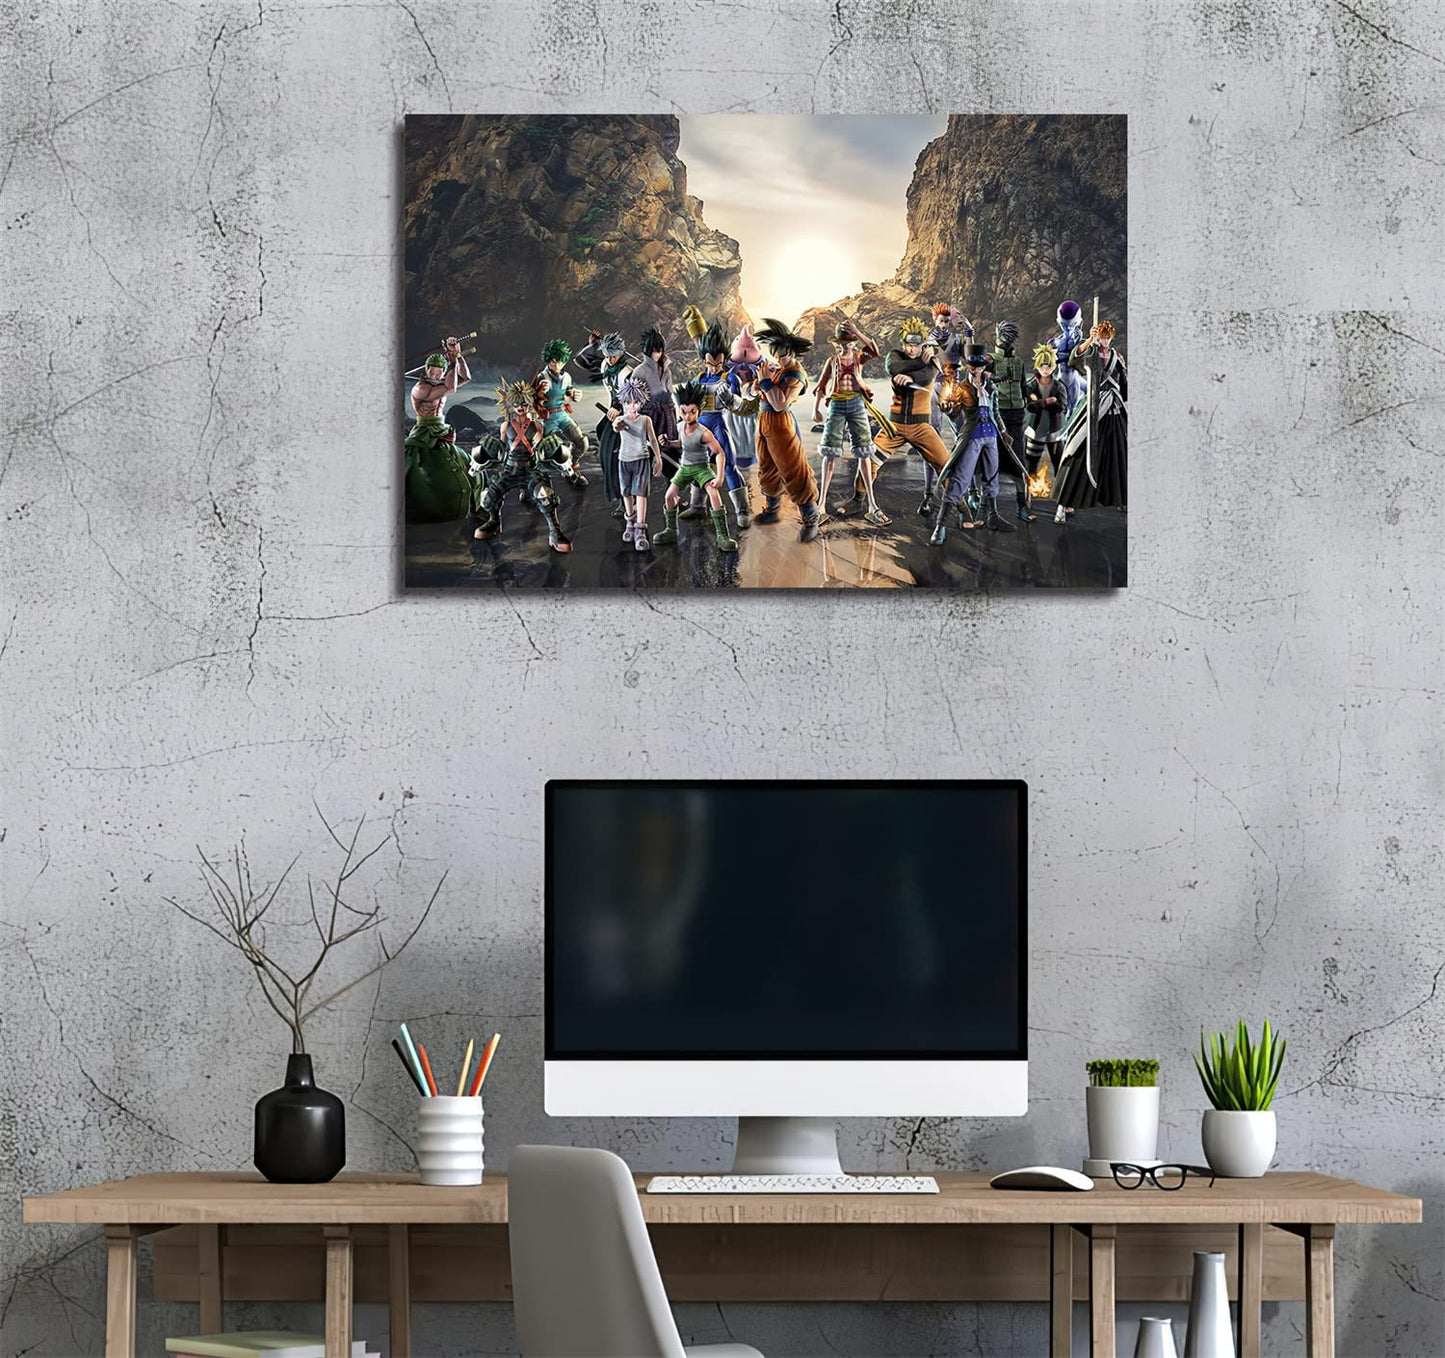 JLXXWNS Japanese Anime Poster My Hero Academia One Piece Luffy Demon Slayer Print on Canvas Painting Wall Art for Living Give Boy Room Decor Gift (Unframed)